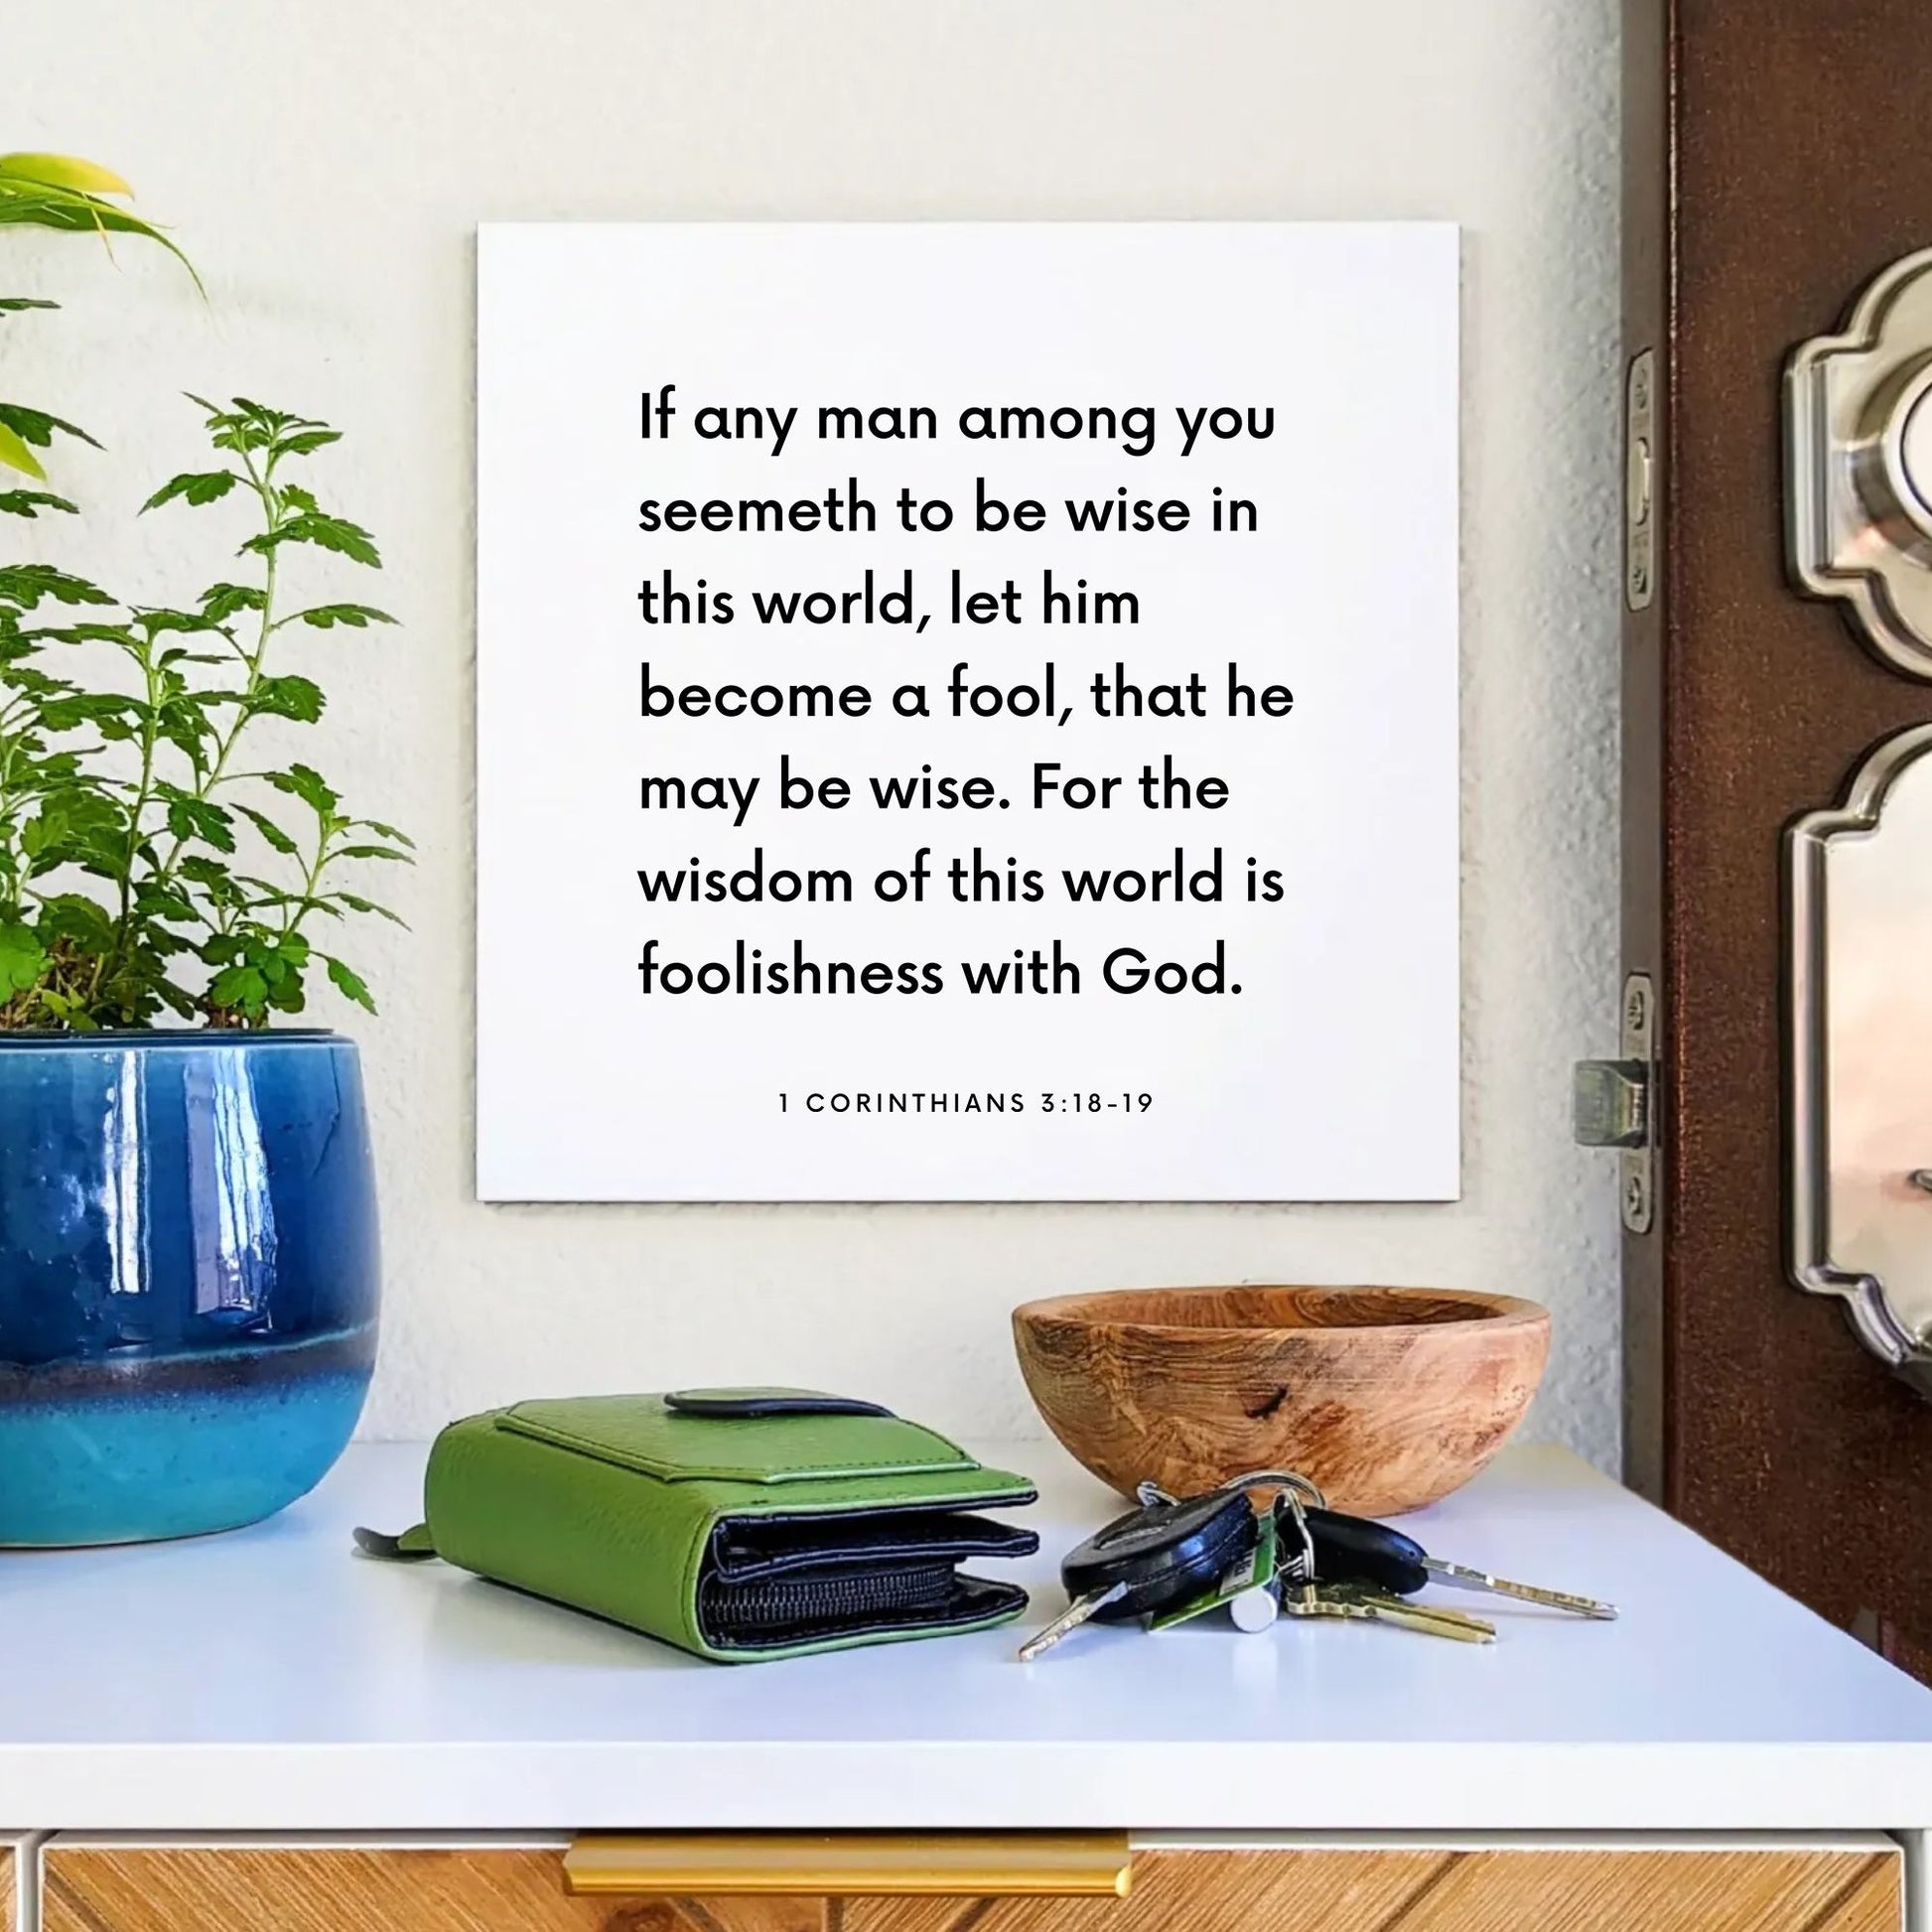 Entryway mouting of the scripture tile for 1 Corinthians 3:18-19 - "The wisdom of this world is foolishness with God"